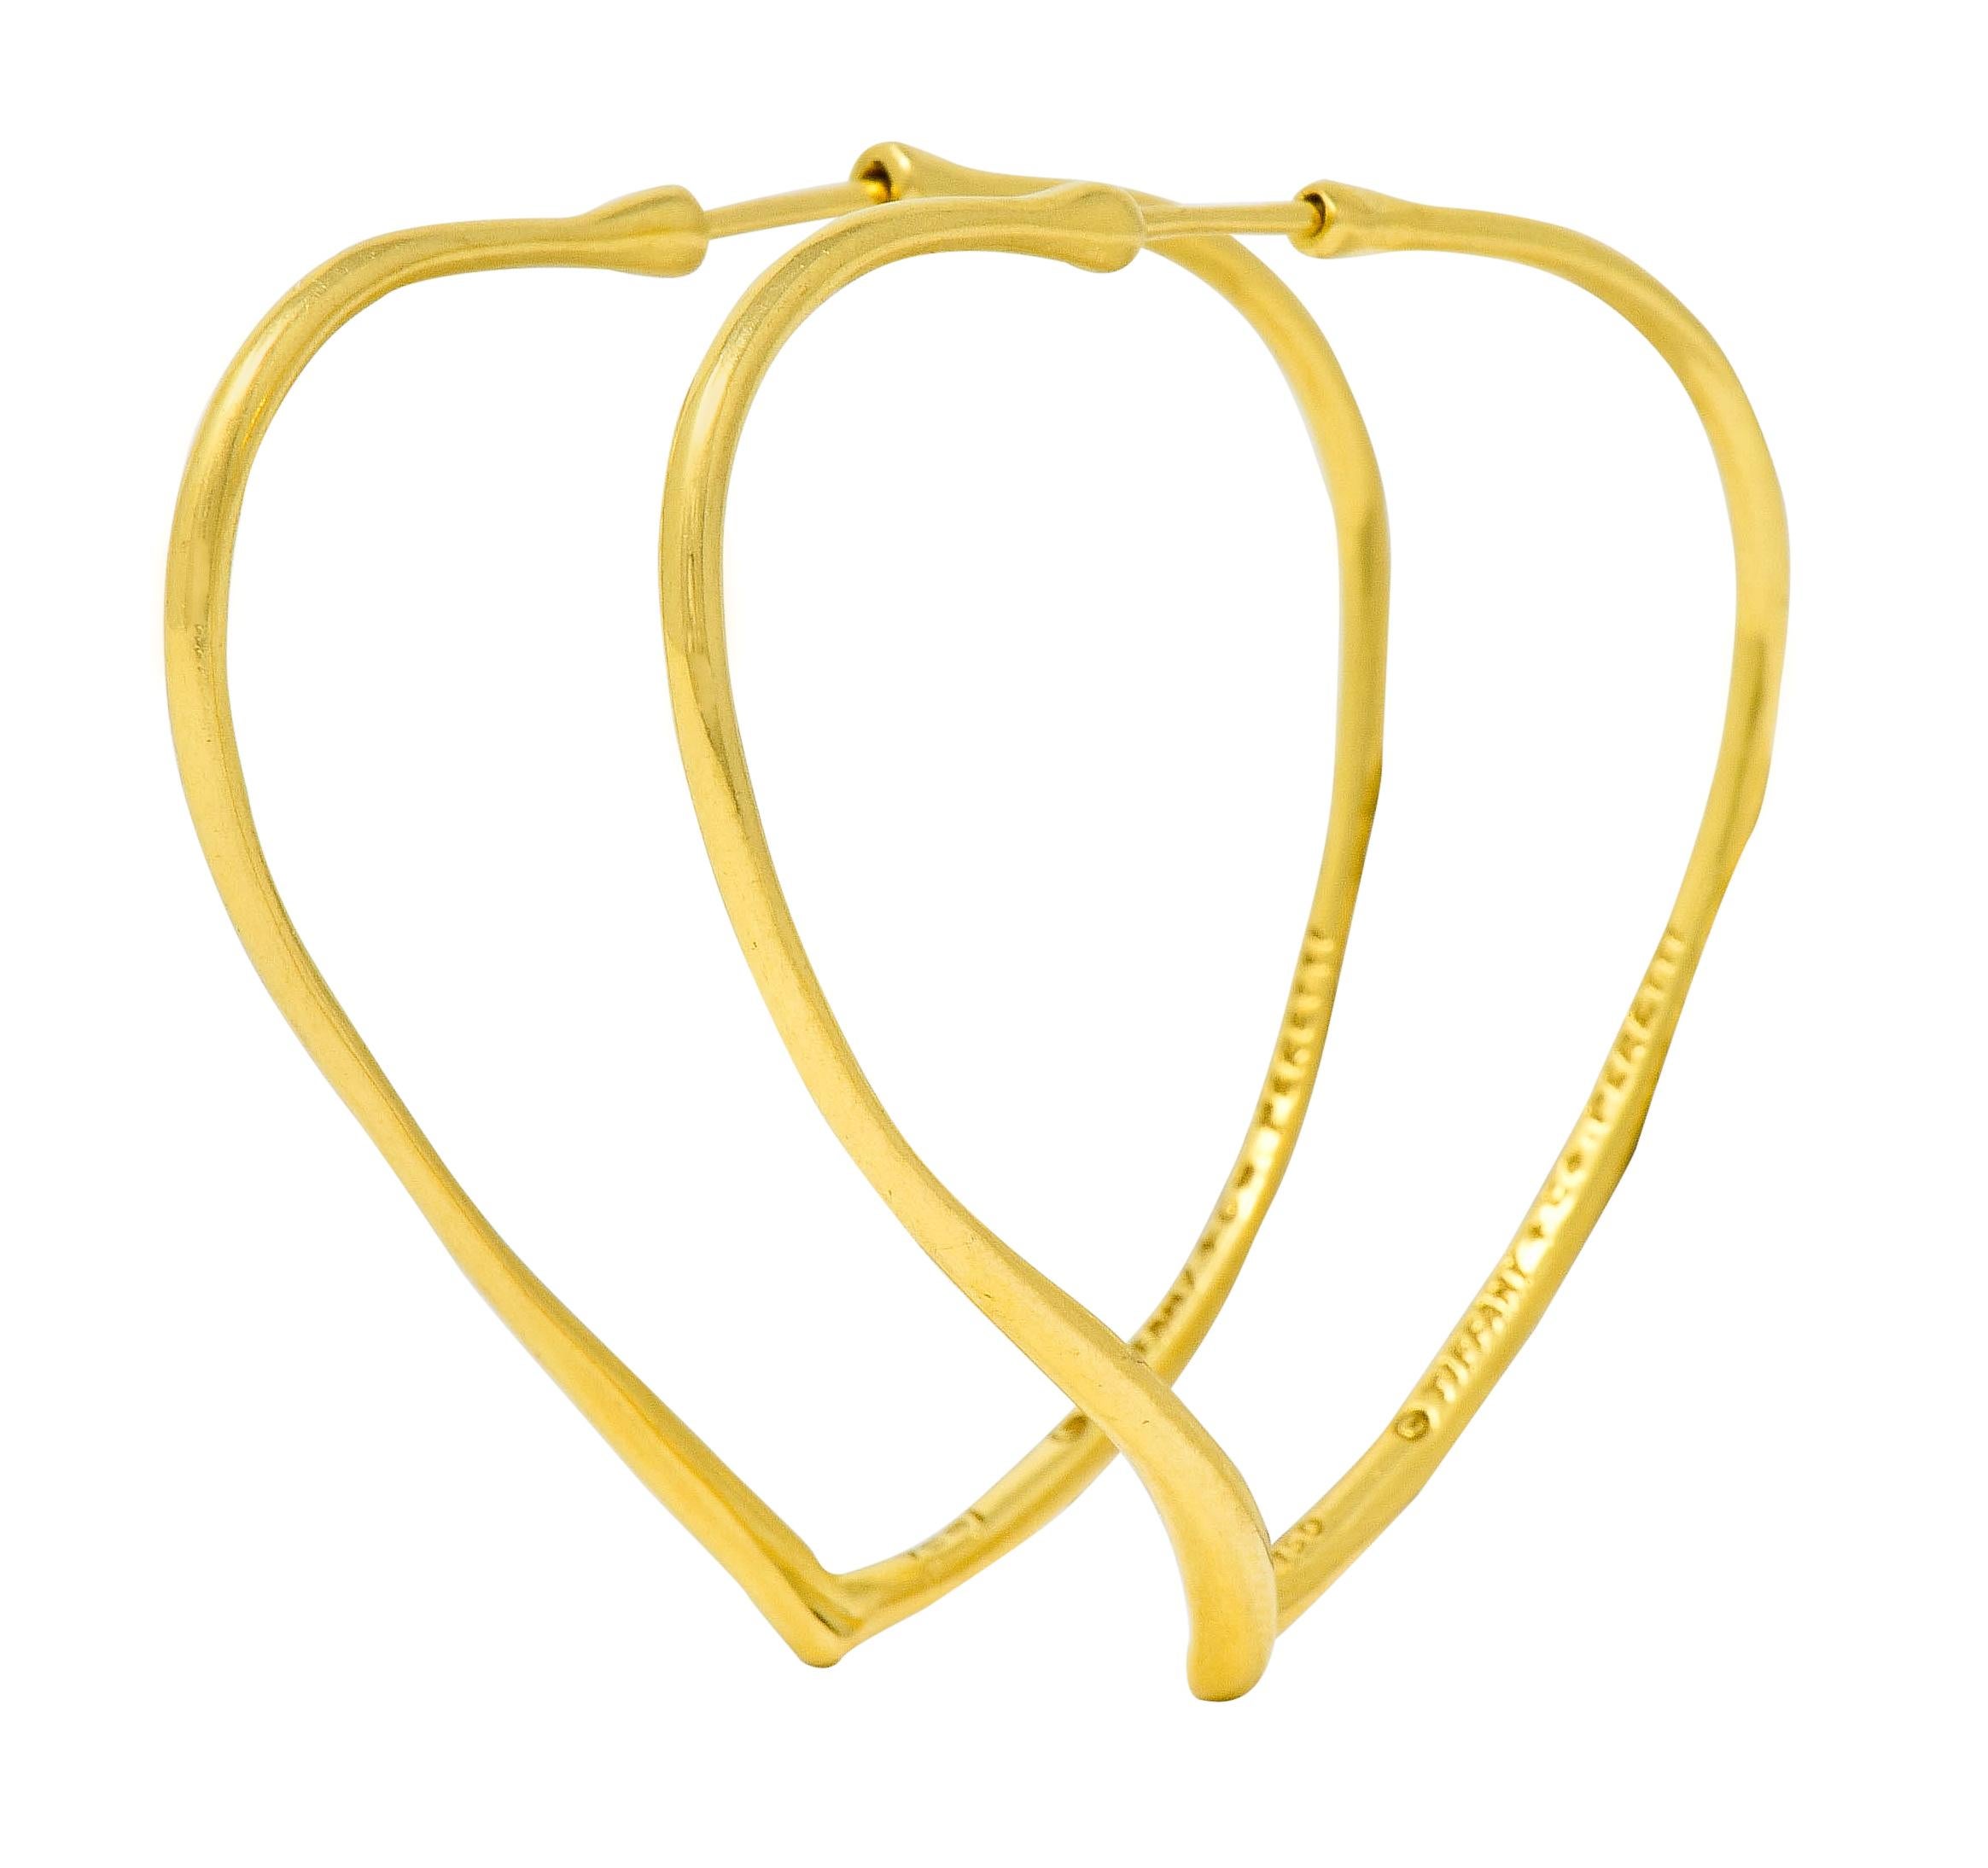 Hoop style earrings, organically shaped as a stylized open heart motif

With broad shoulders and fancifully torqued to echo heart, terminating at its iconic point

Completed by concealed posts

Both signed Tiffany & Co. Peretti and stamped 750 for